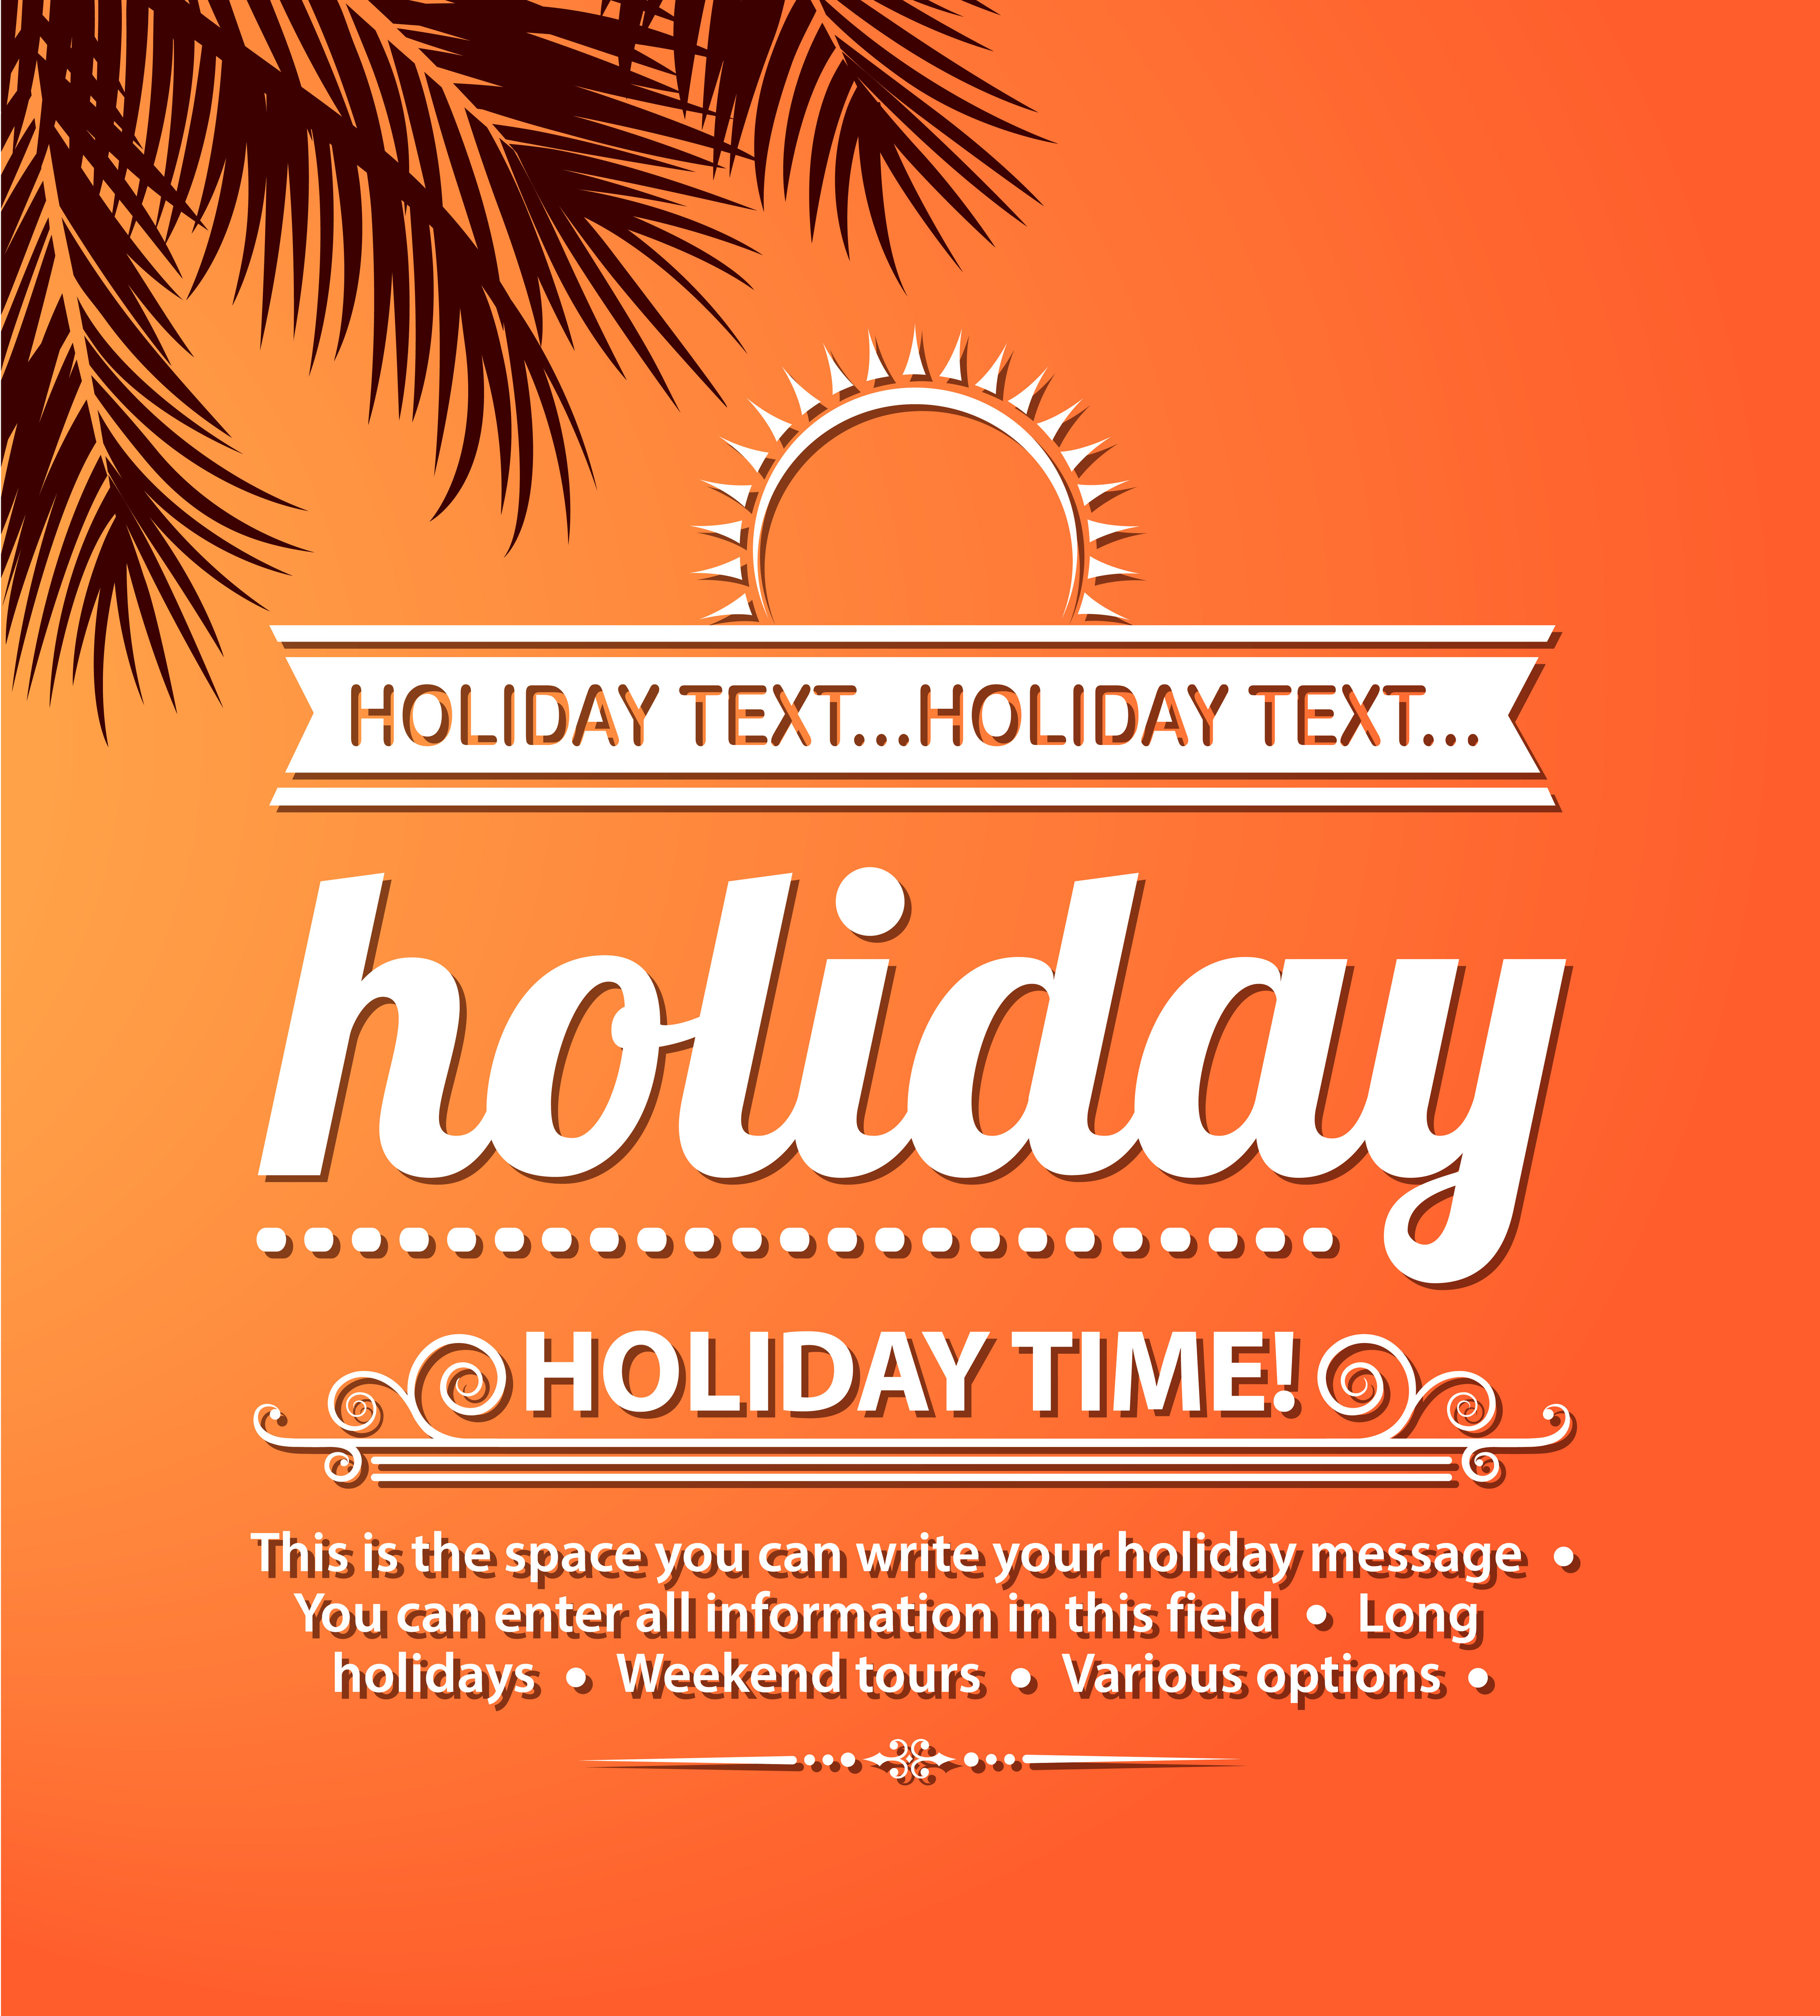 Holiday message. Holidays text.